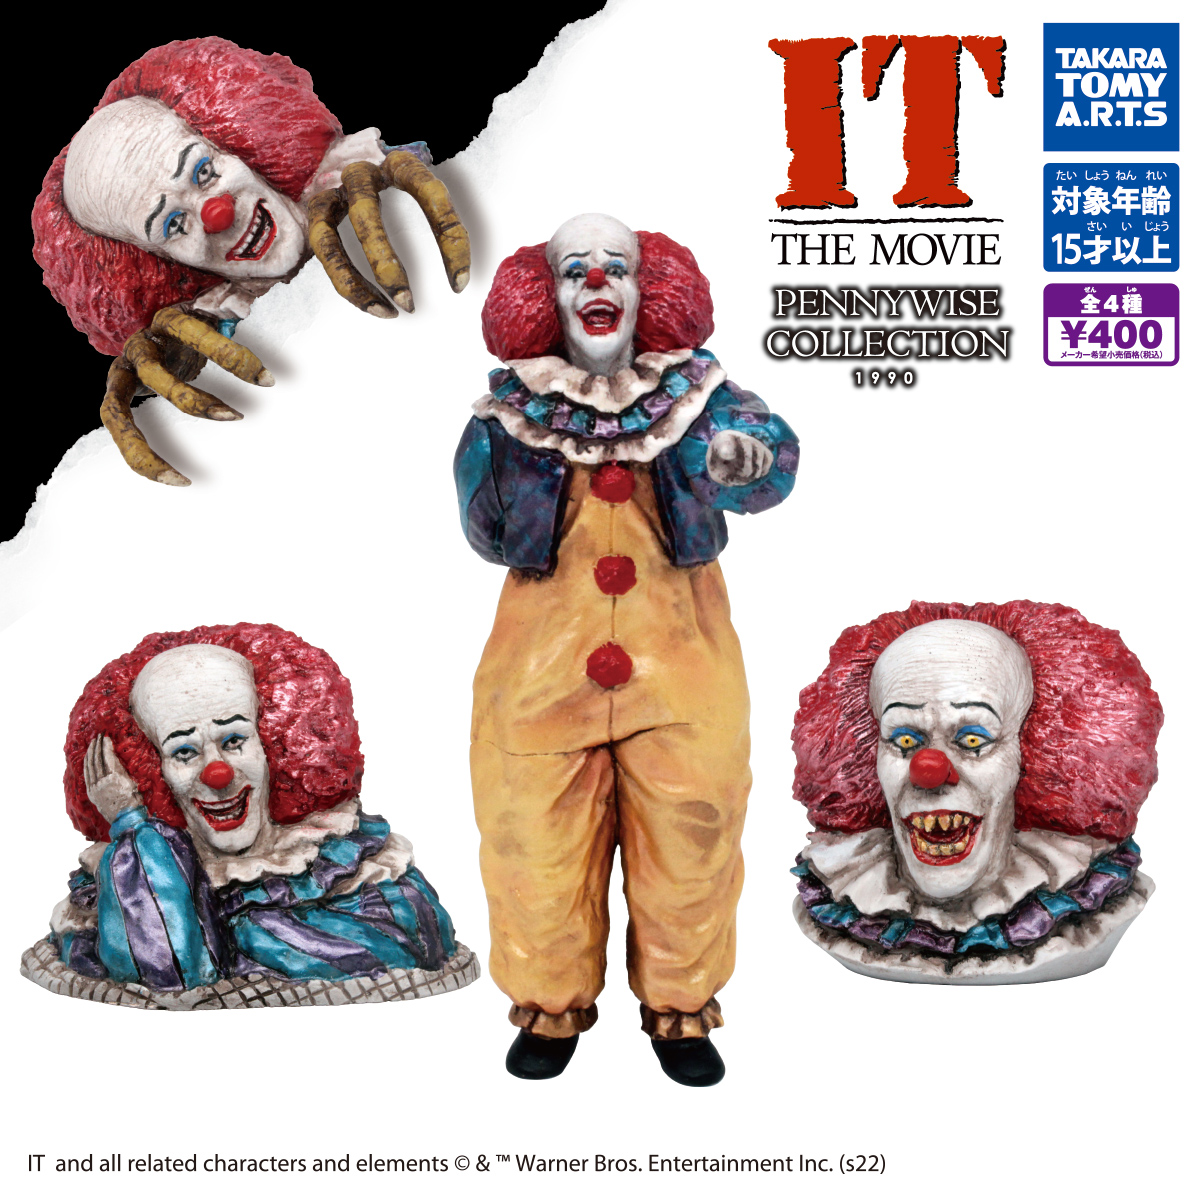 IT PENNYWISE COLLECTION 1990｜商品情報｜タカラトミーアーツ